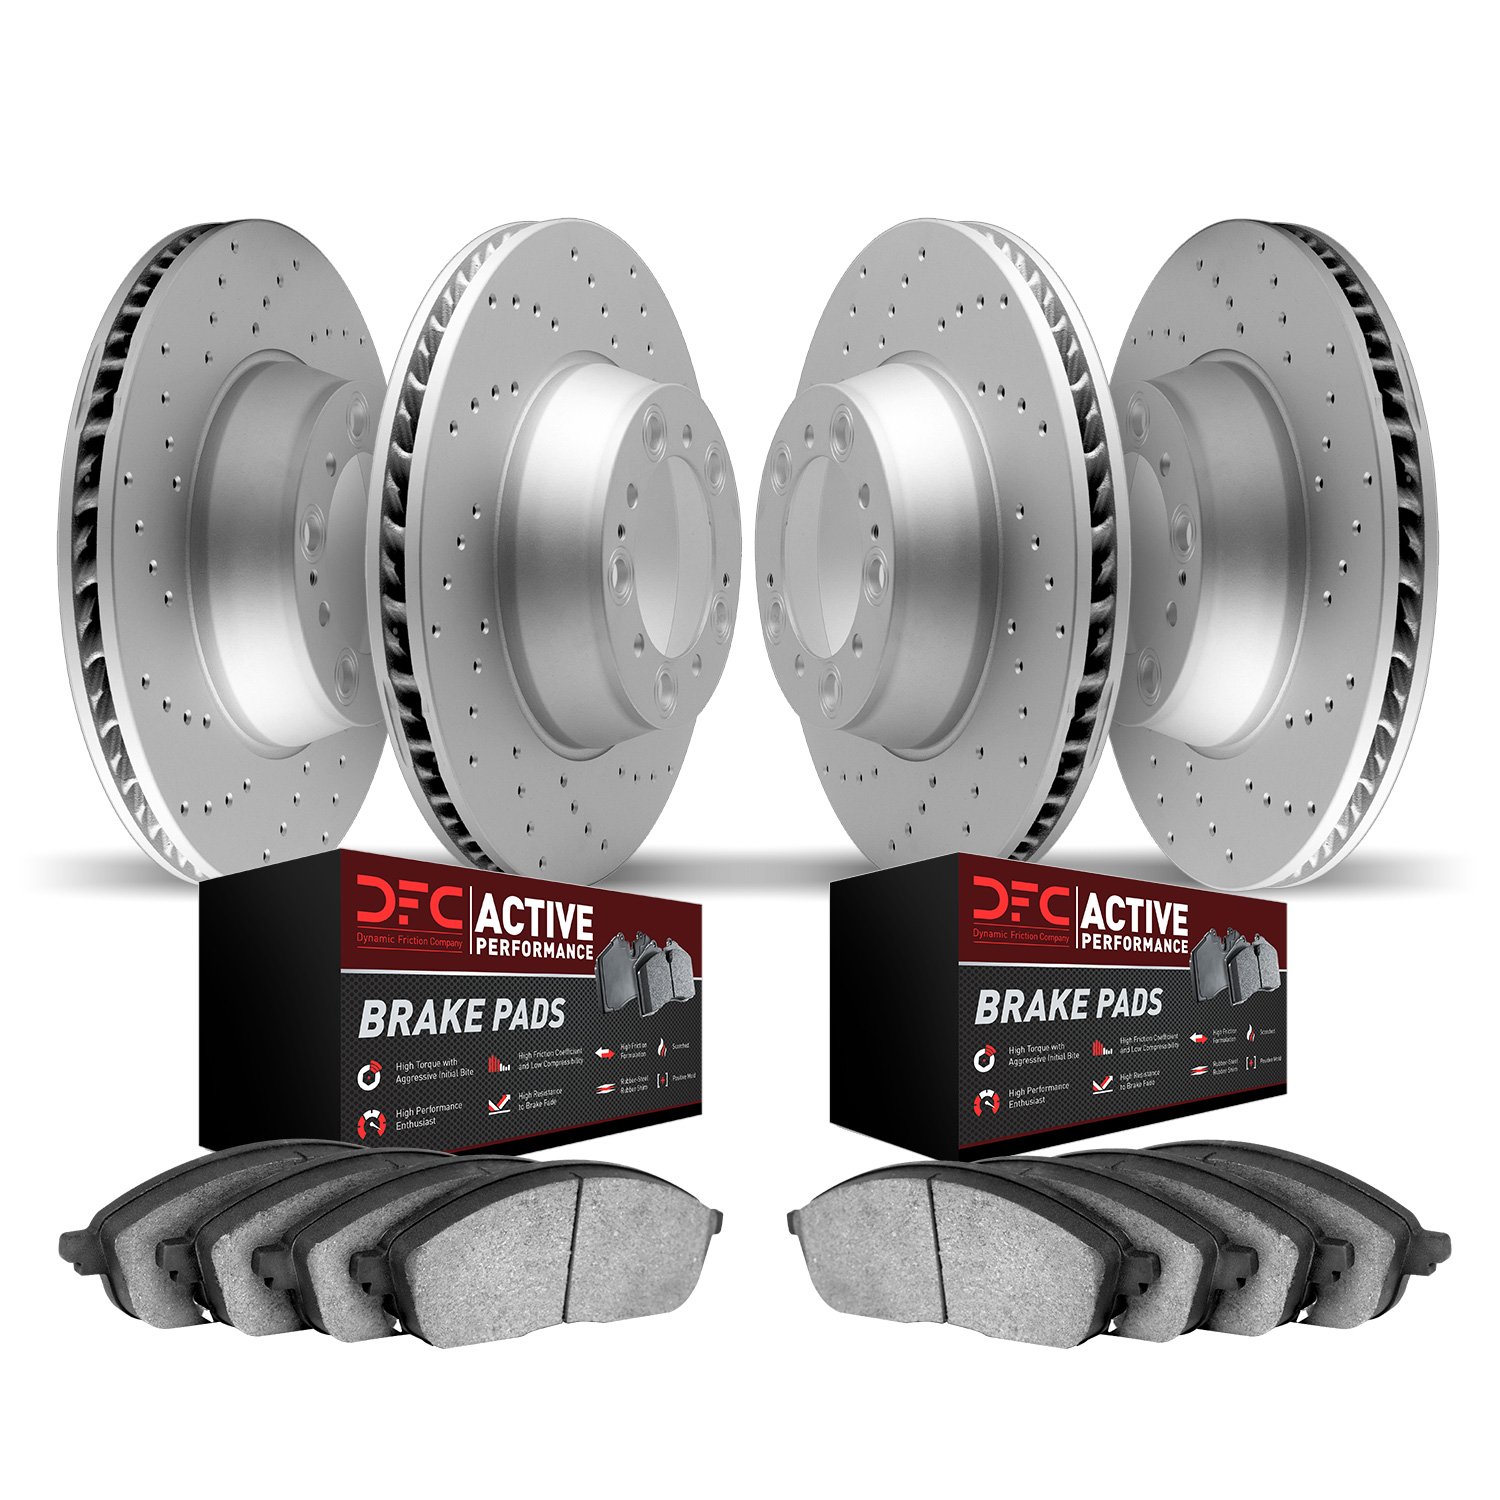 2704-45007 Geoperformance Drilled Brake Rotors with Active Performance Pads Kit, 2014-2014 GM, Position: Front and Rear